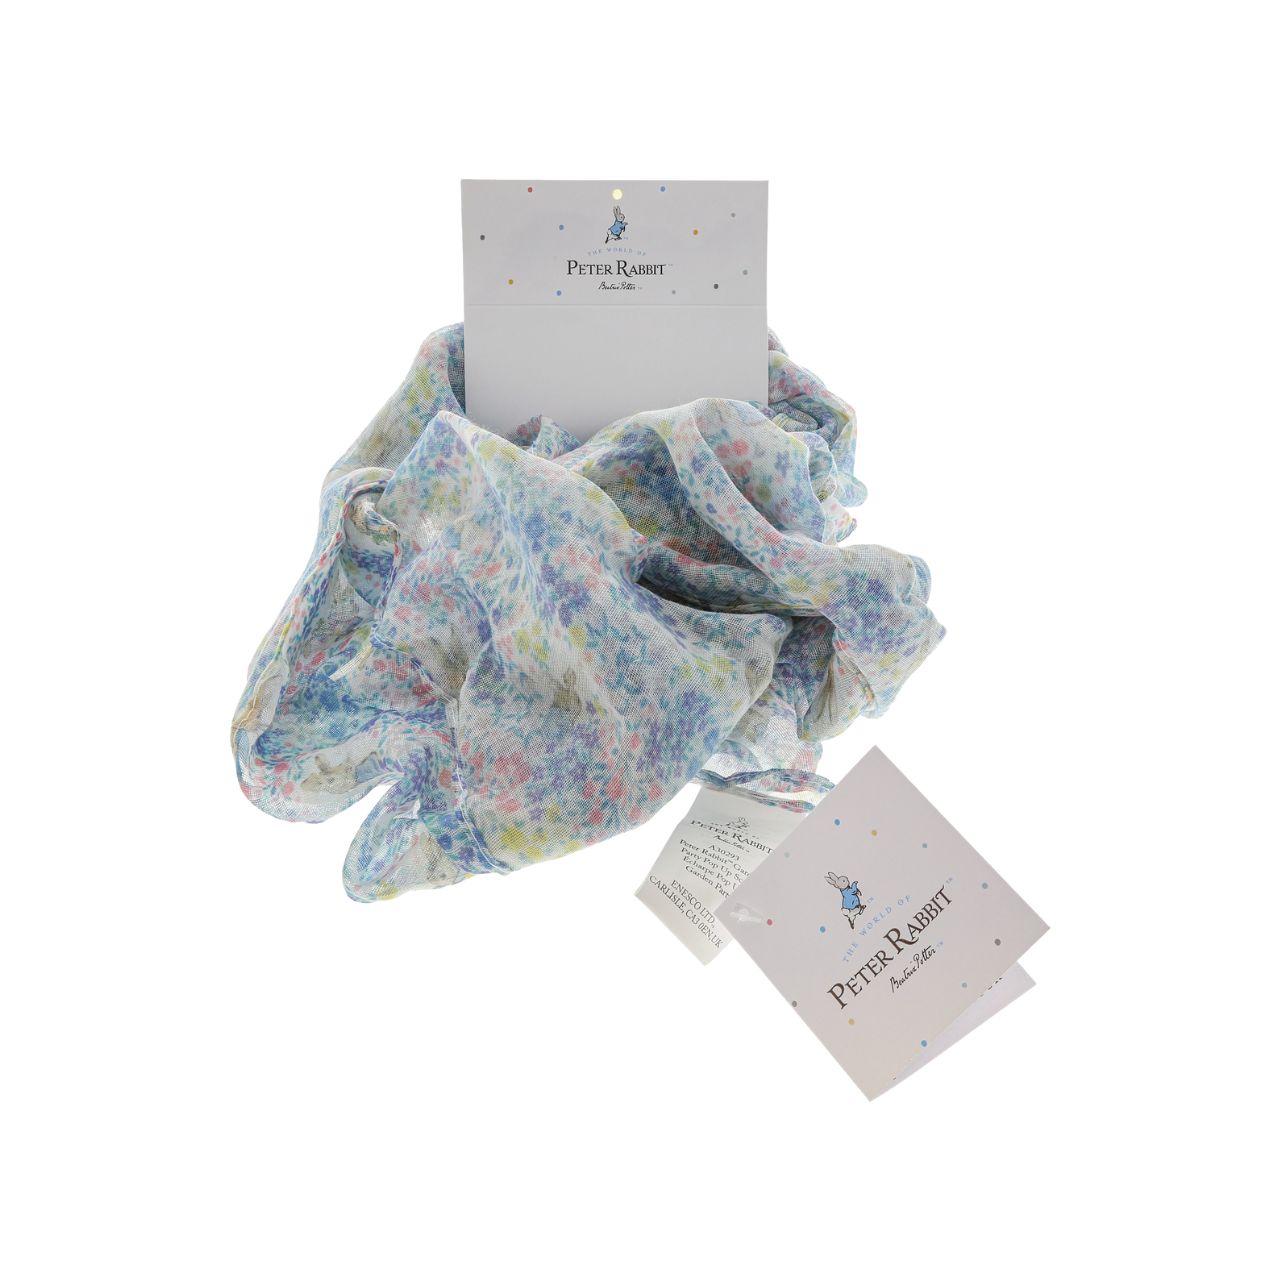 This beautifully made Peter Rabbit Garden Party Pop Up Scarf would be a wonderful addition to any outfit. Why not team up with our other Garden Party Pop Up accessories to create a co ordinating outfit or gift.